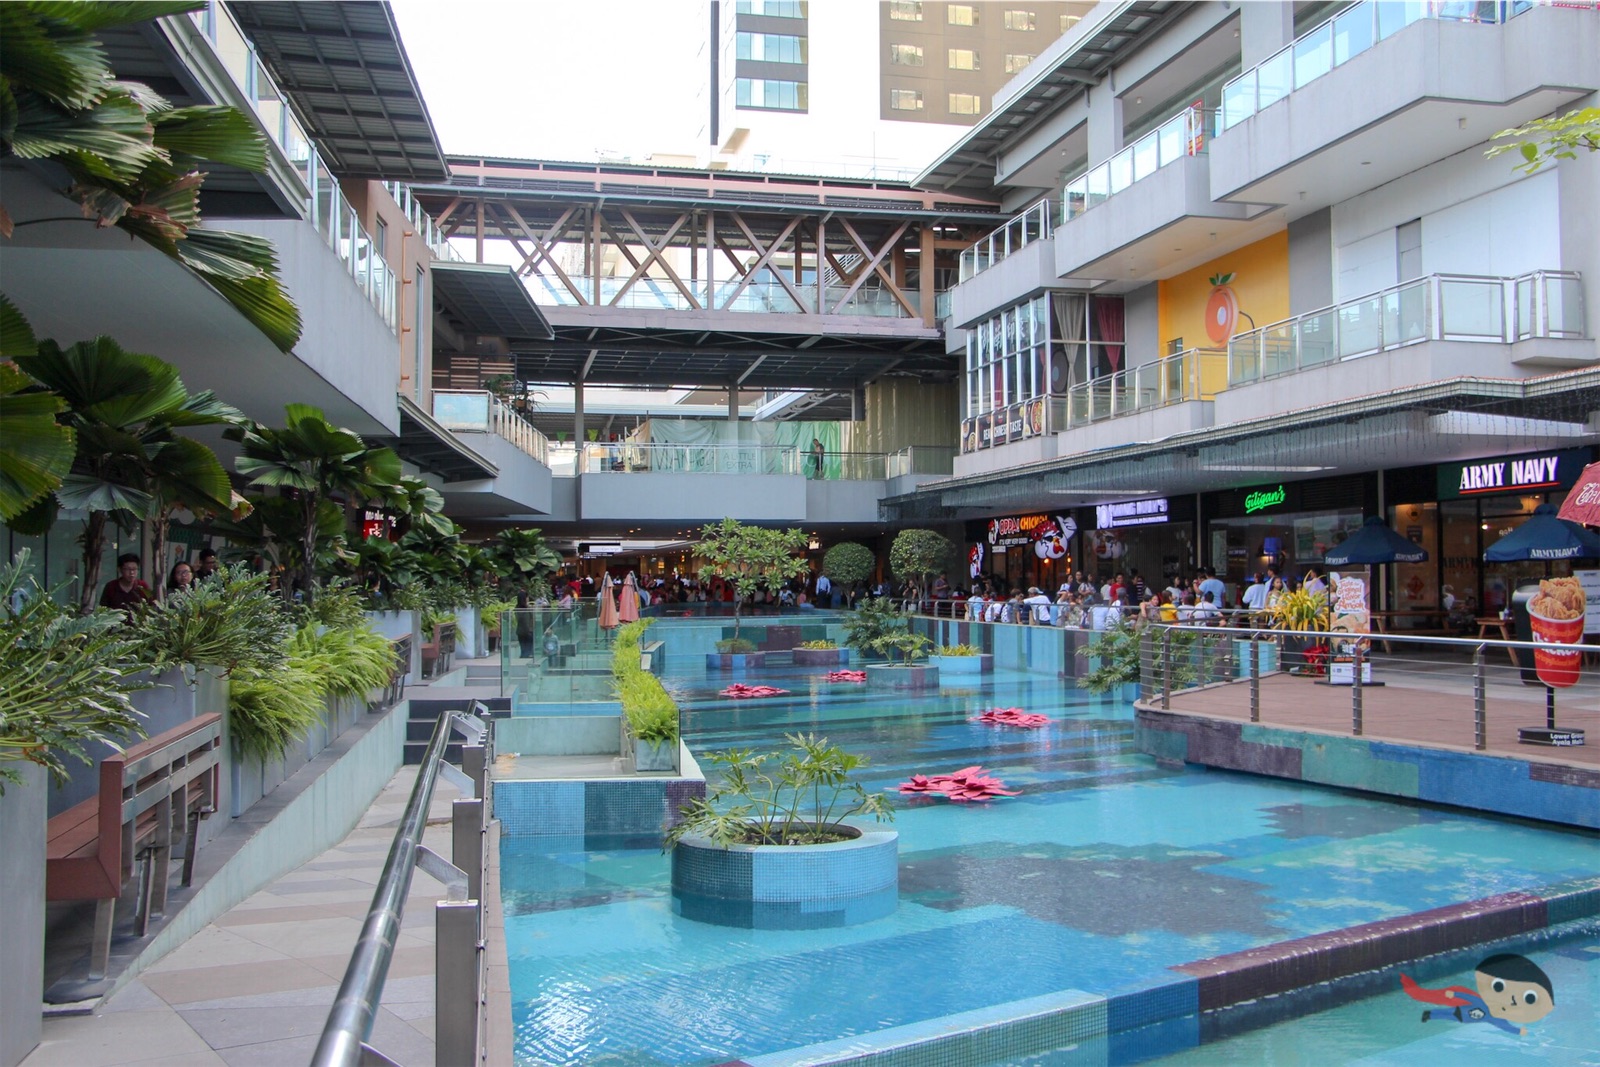 A Quick Tour in Circuit Mall - pond, sky garden and more - Wander Kid ...